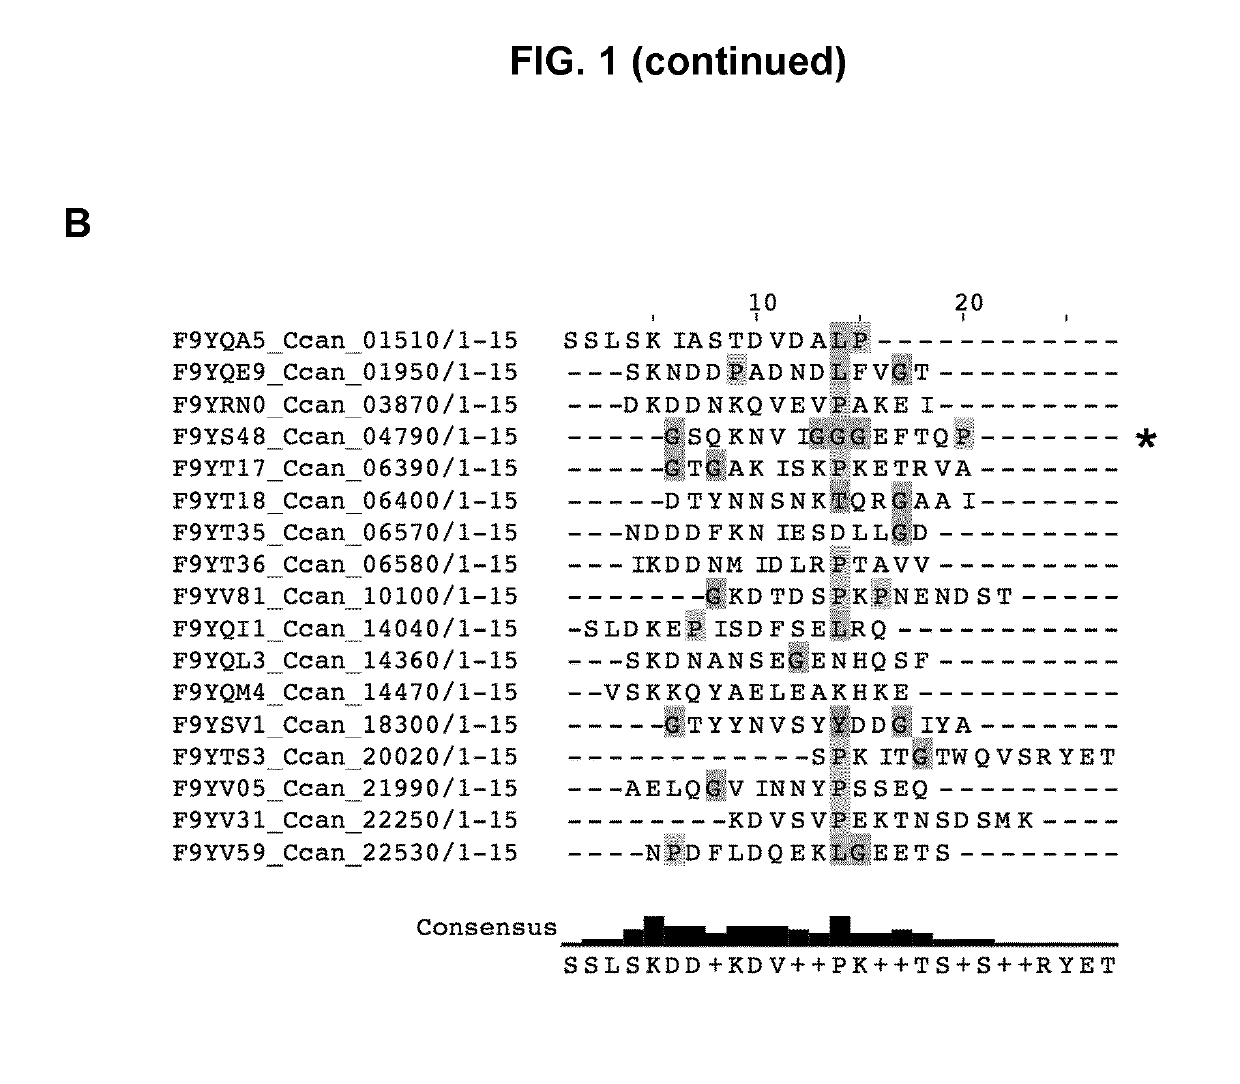 Lipoprotein export signals and uses thereof